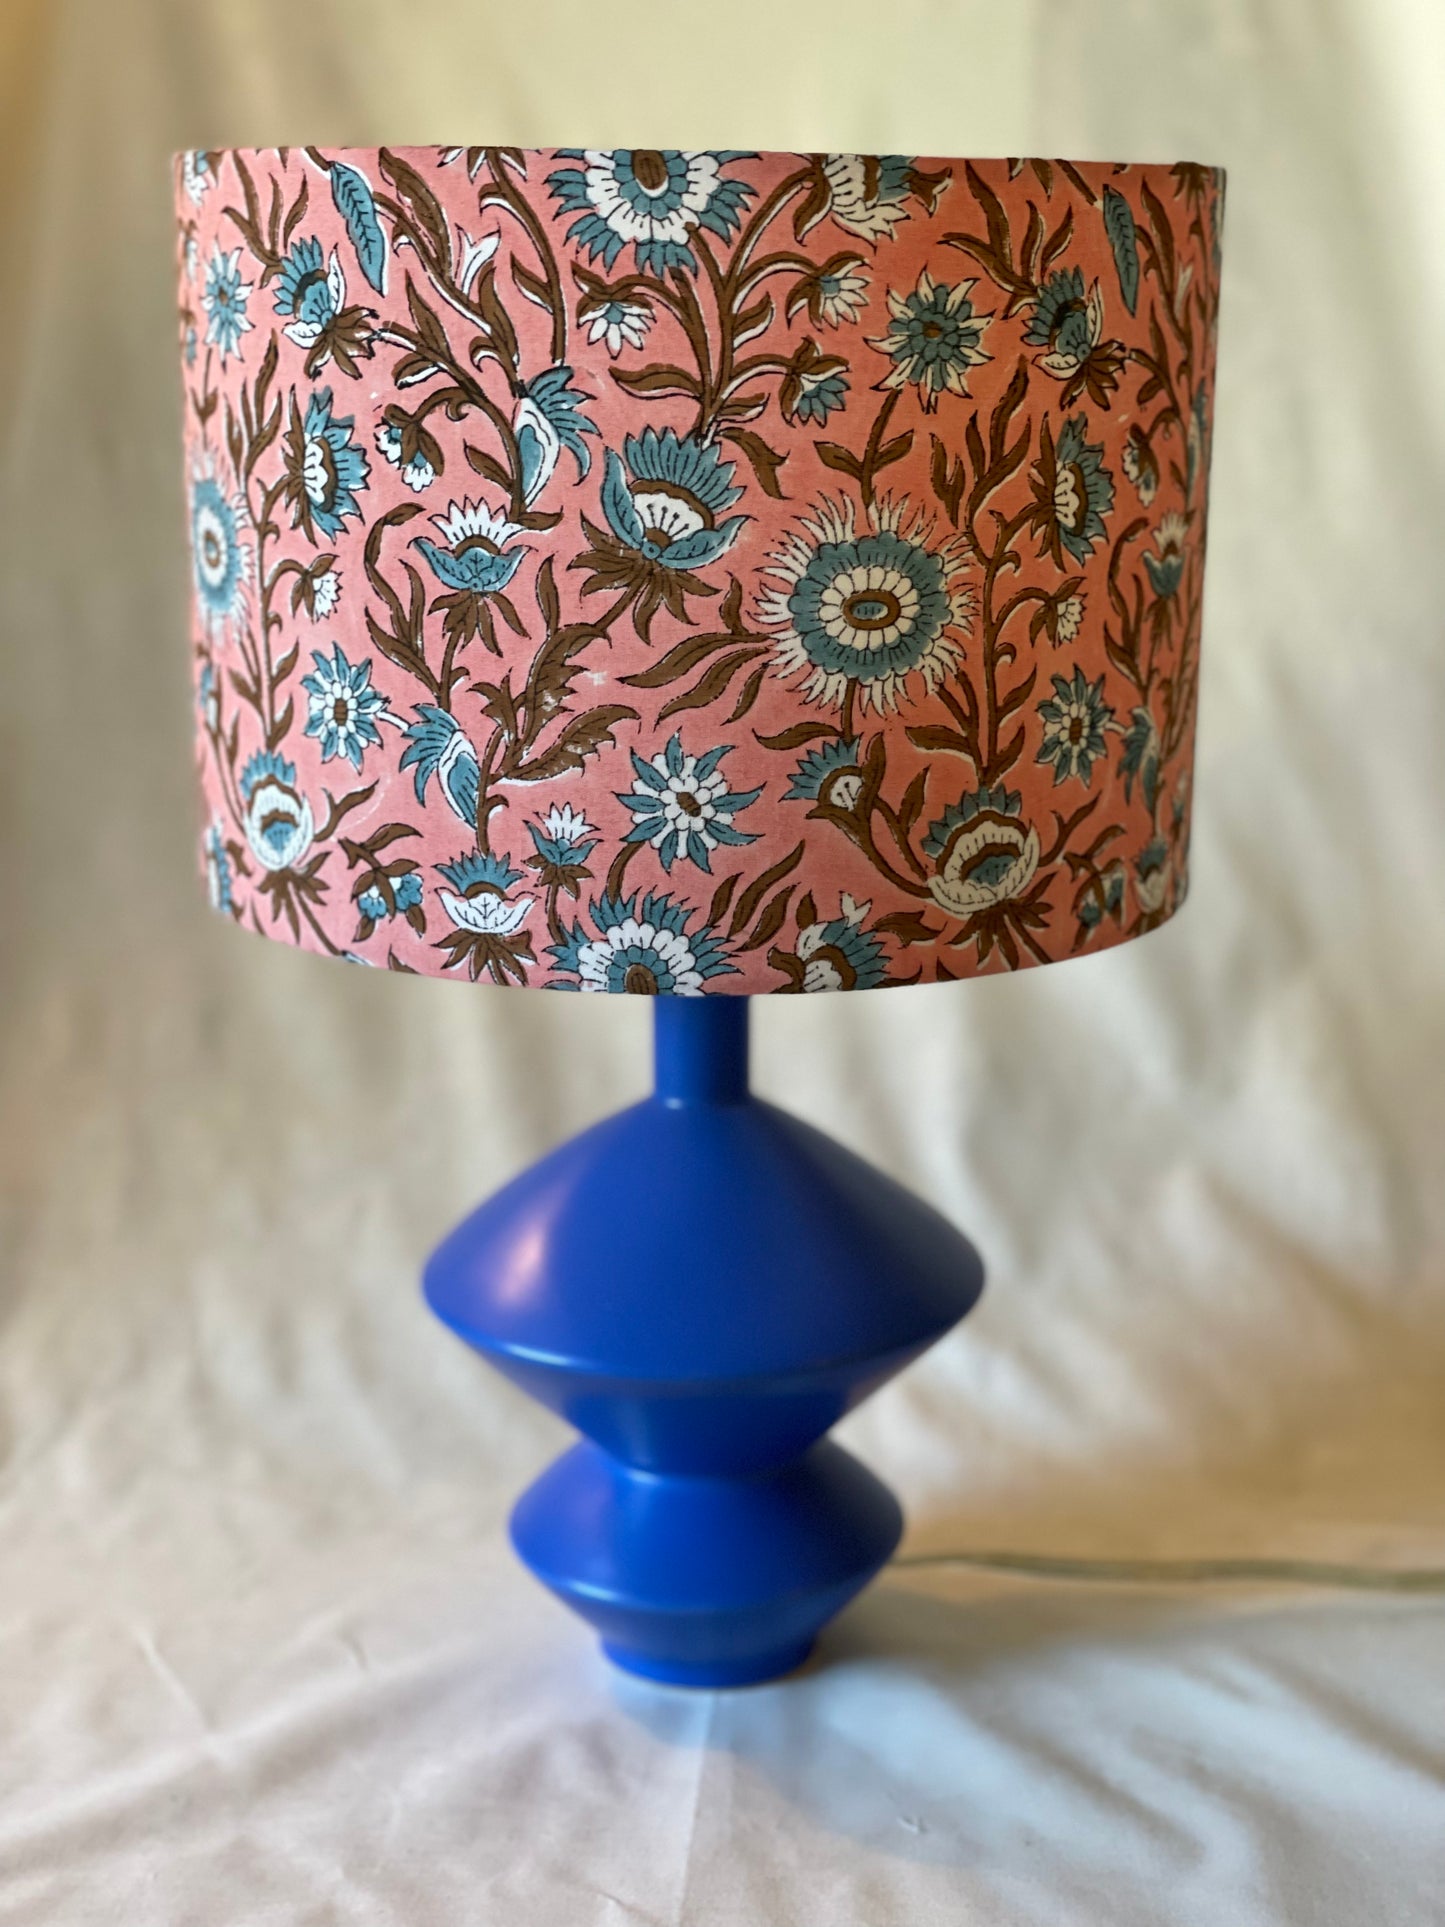 10 inch Drum Lampshade. Indian Block print from Jaipur. Rosy Pink with Brown and Cadet Blue Floral Motif.